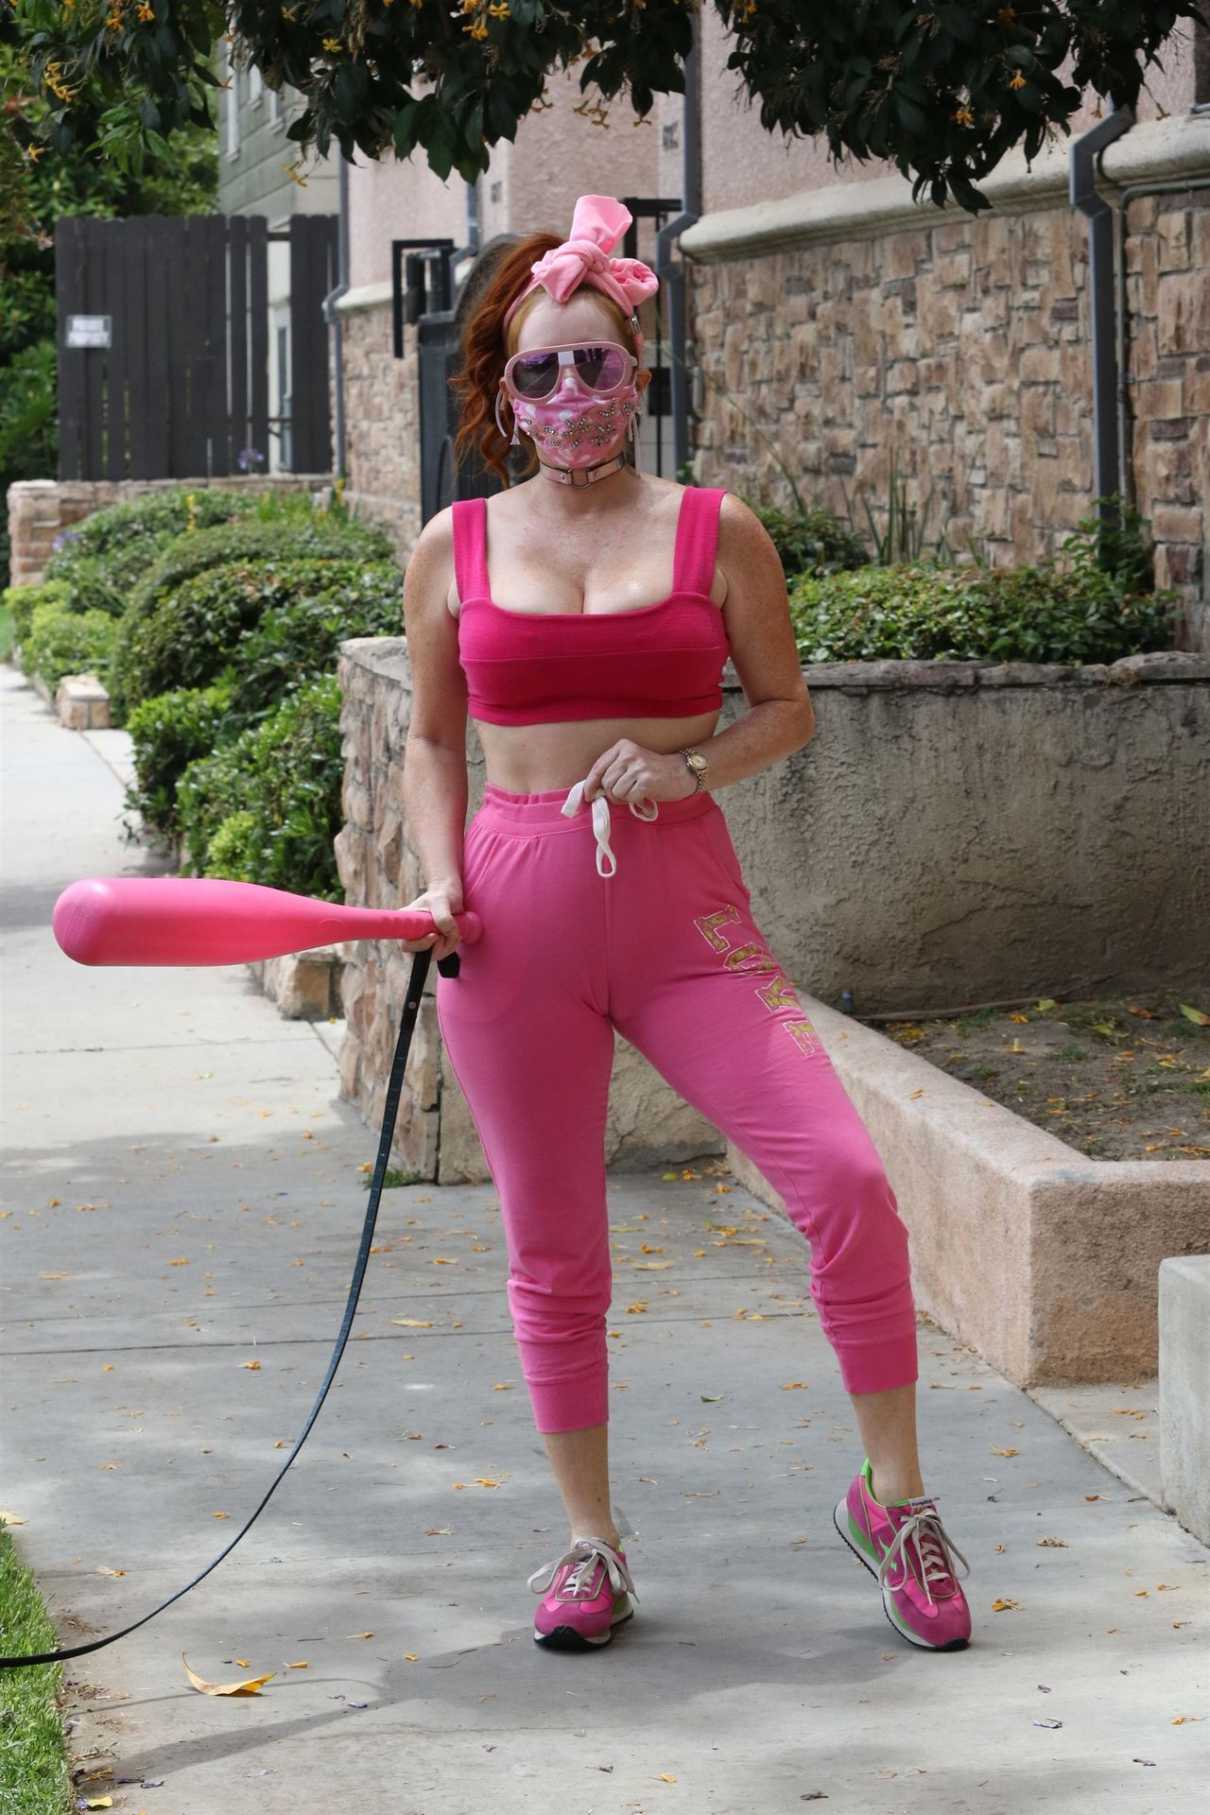 Phoebe Price in a Pink Workout Clothes